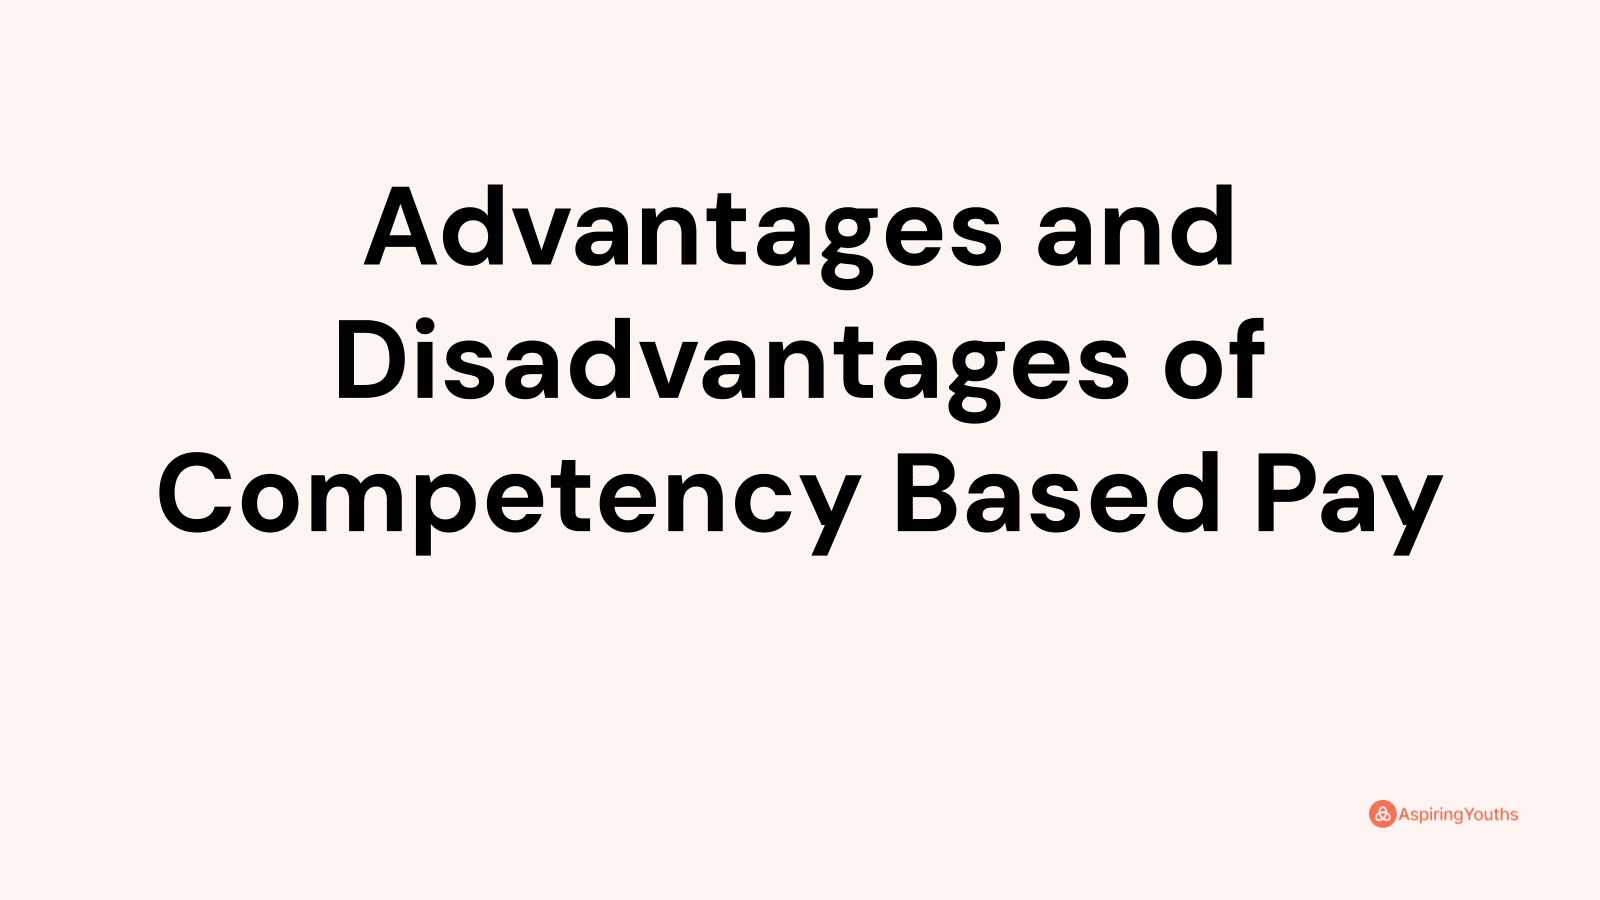 Advantages and disadvantages of Competency Based Pay